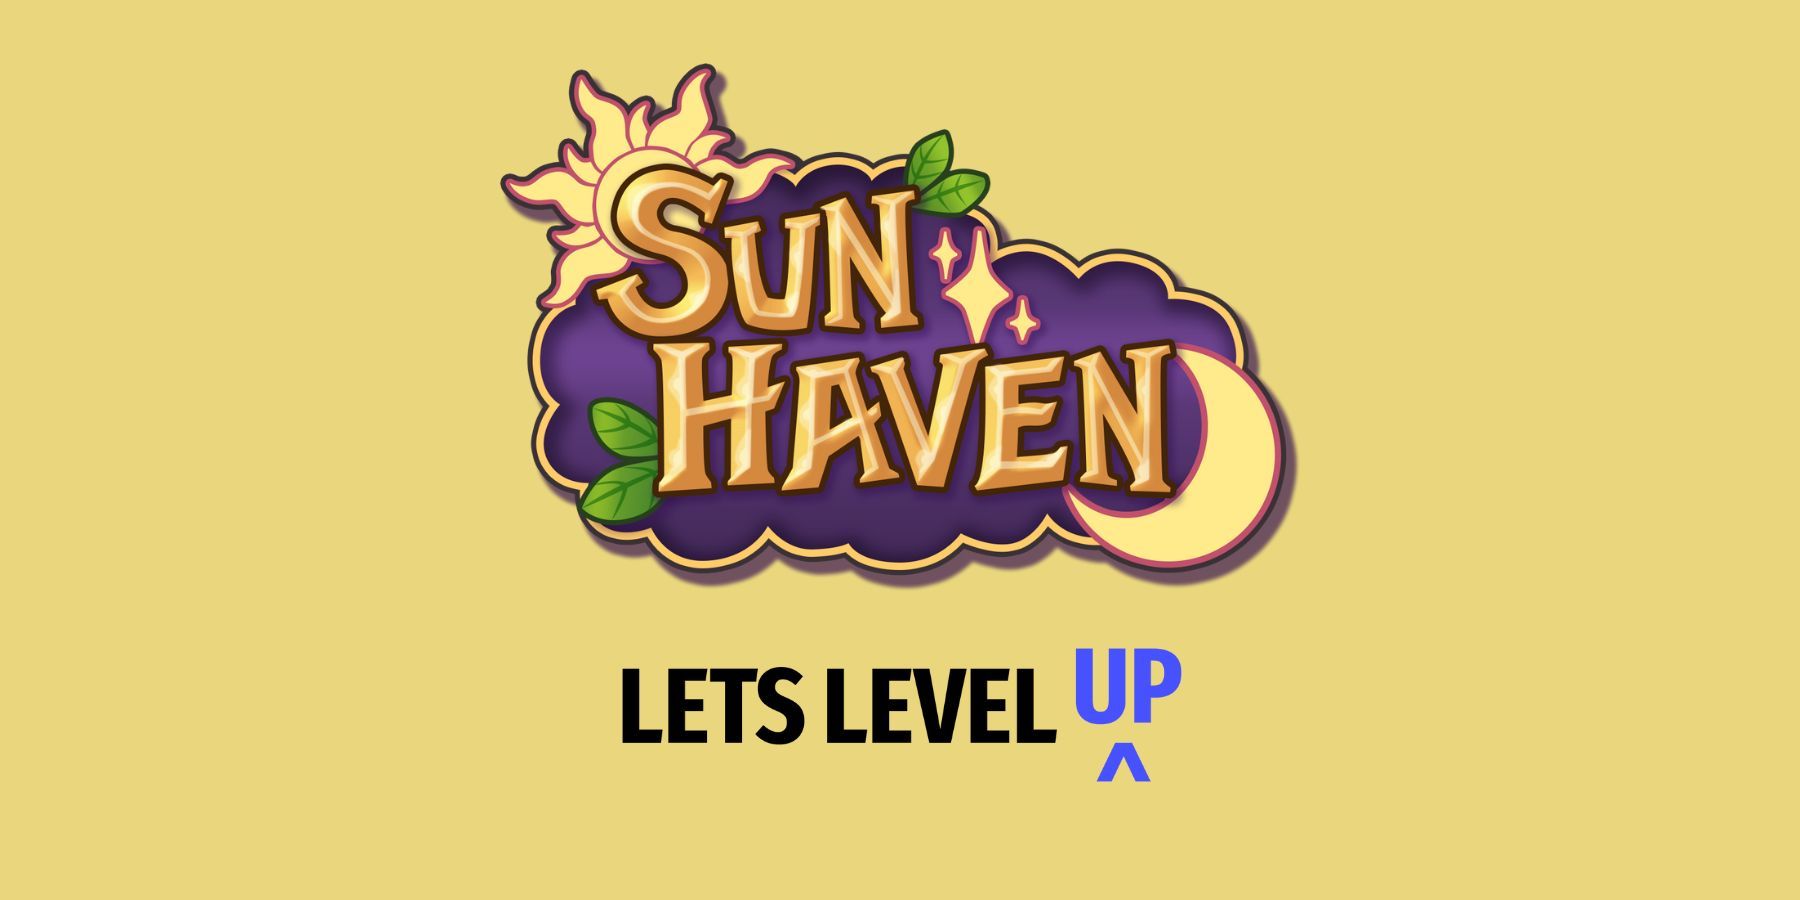 How to Level Up in Sun Haven